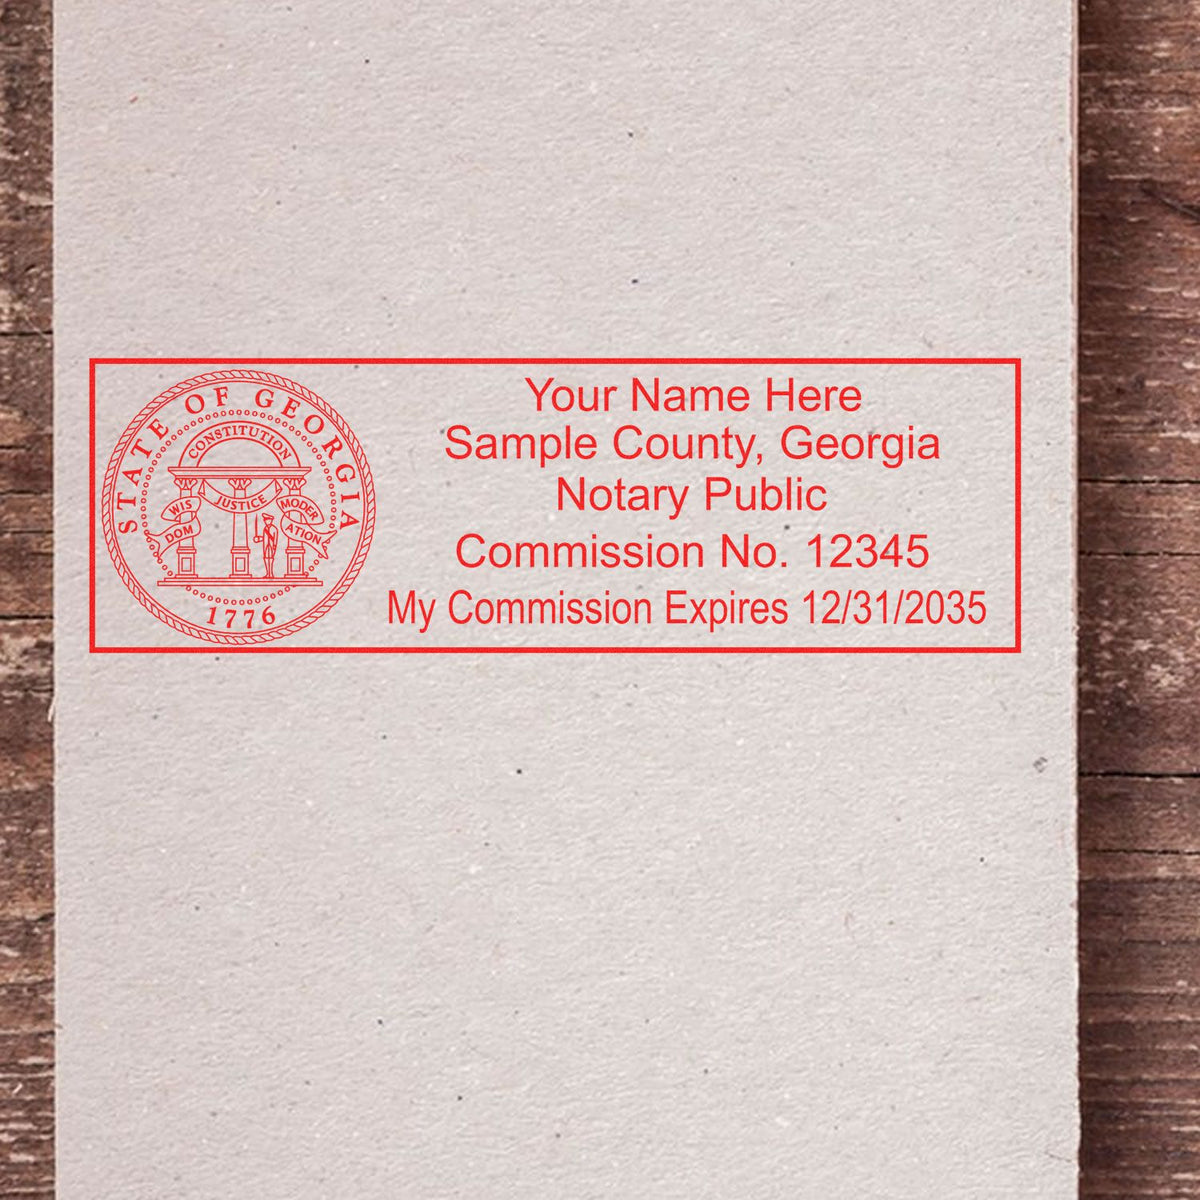 The Heavy-Duty Georgia Rectangular Notary Stamp stamp impression comes to life with a crisp, detailed photo on paper - showcasing true professional quality.